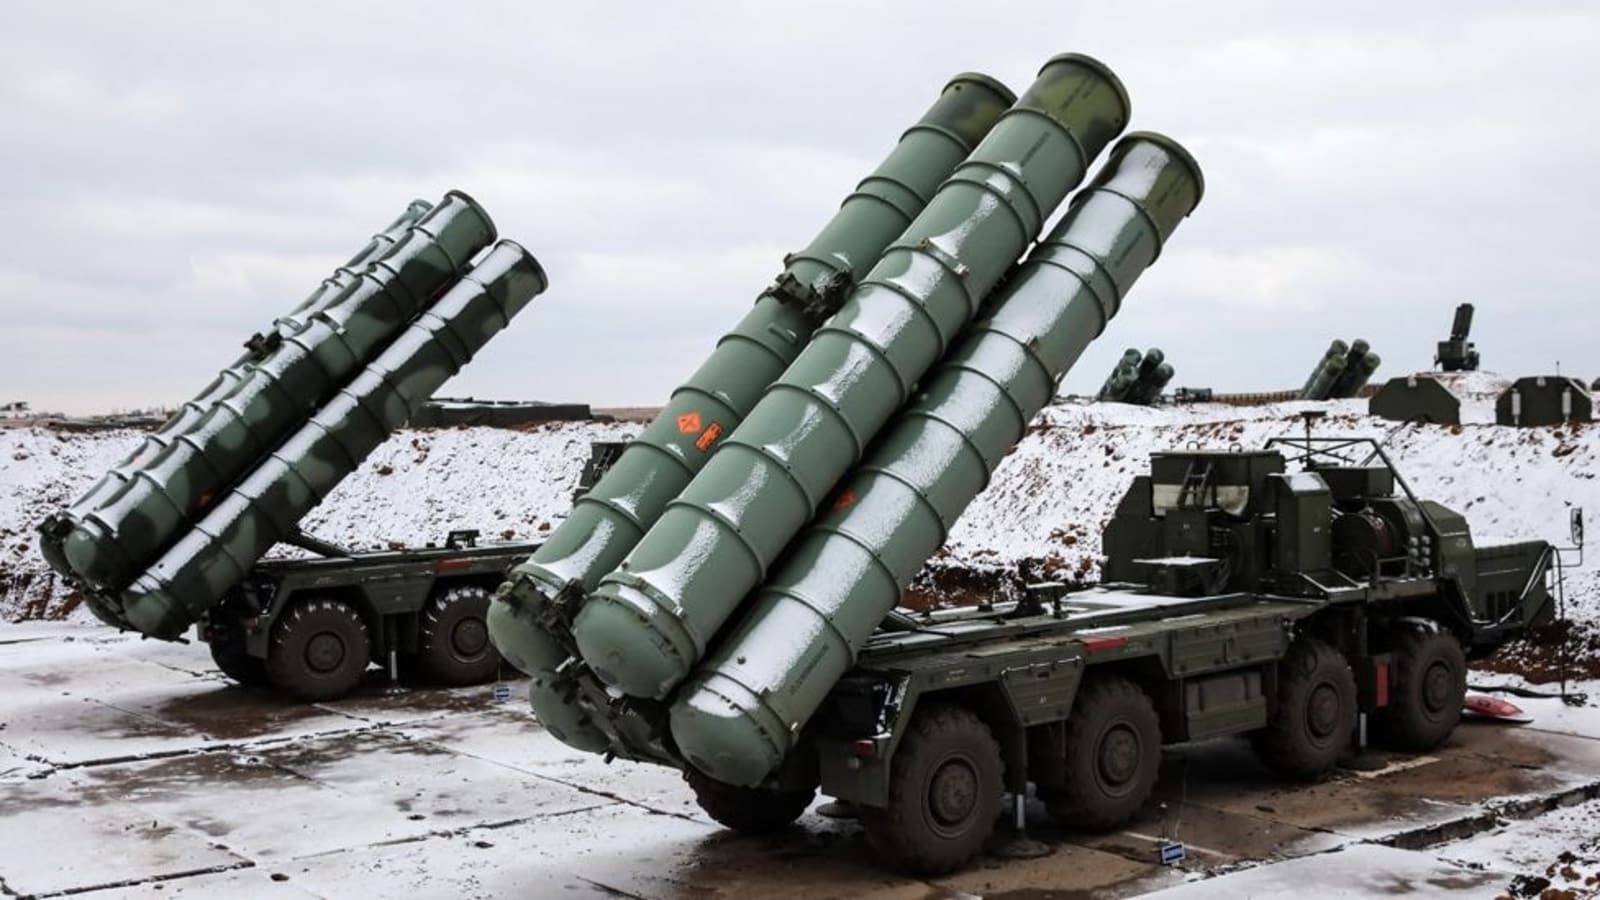 S-400 missile system deal: US may still sanction India, says top diplomat